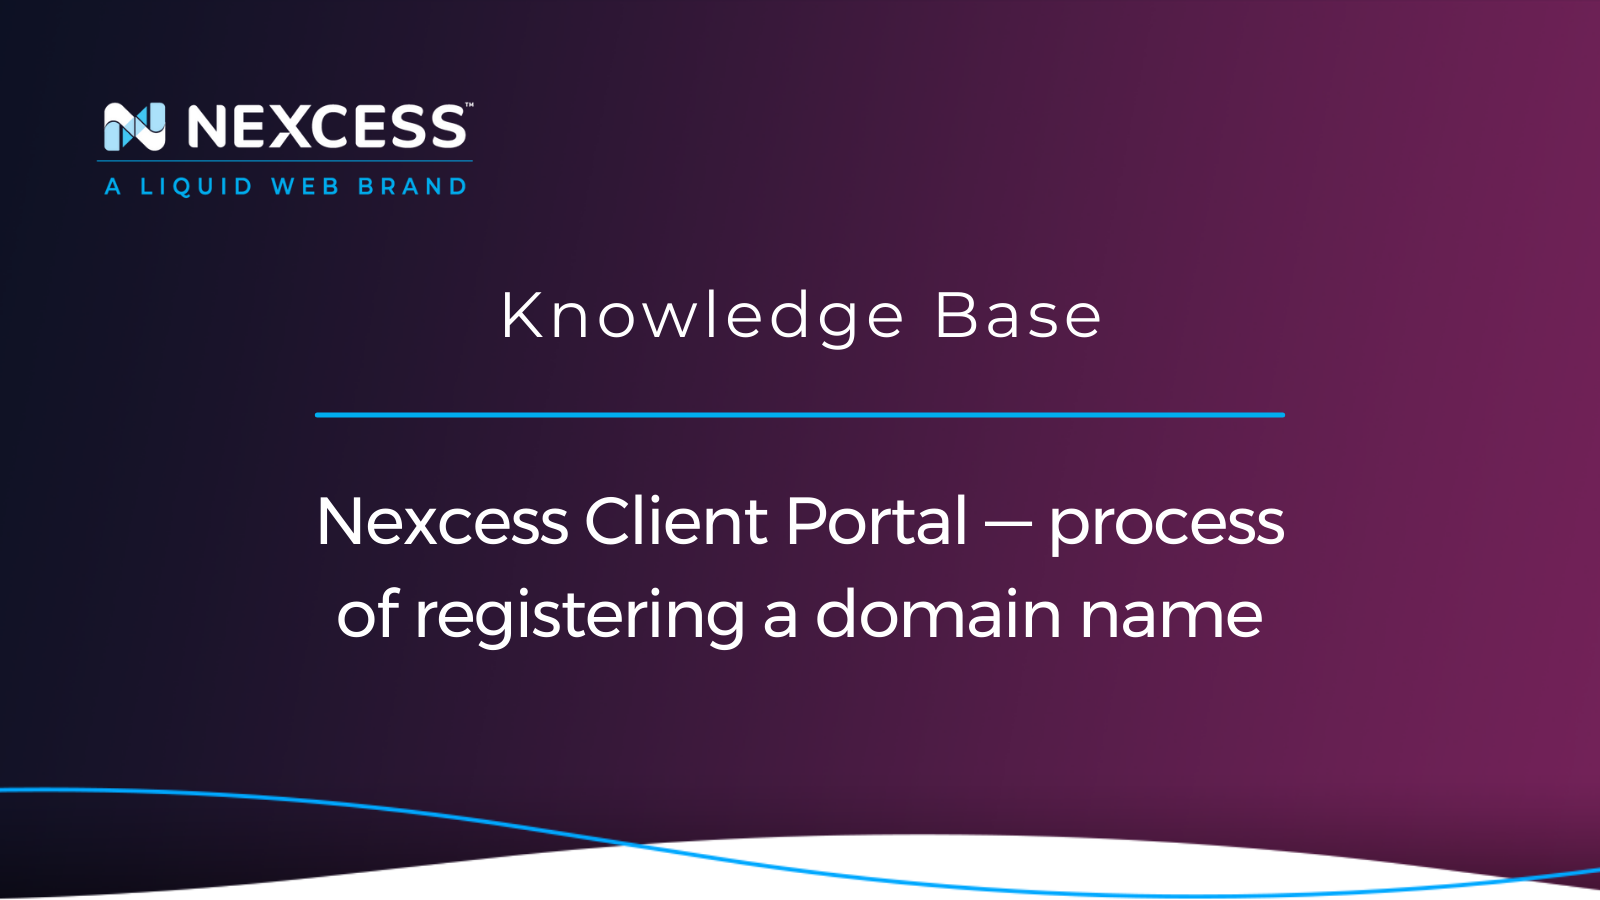 Nexcess Client Portal — process of registering a domain name